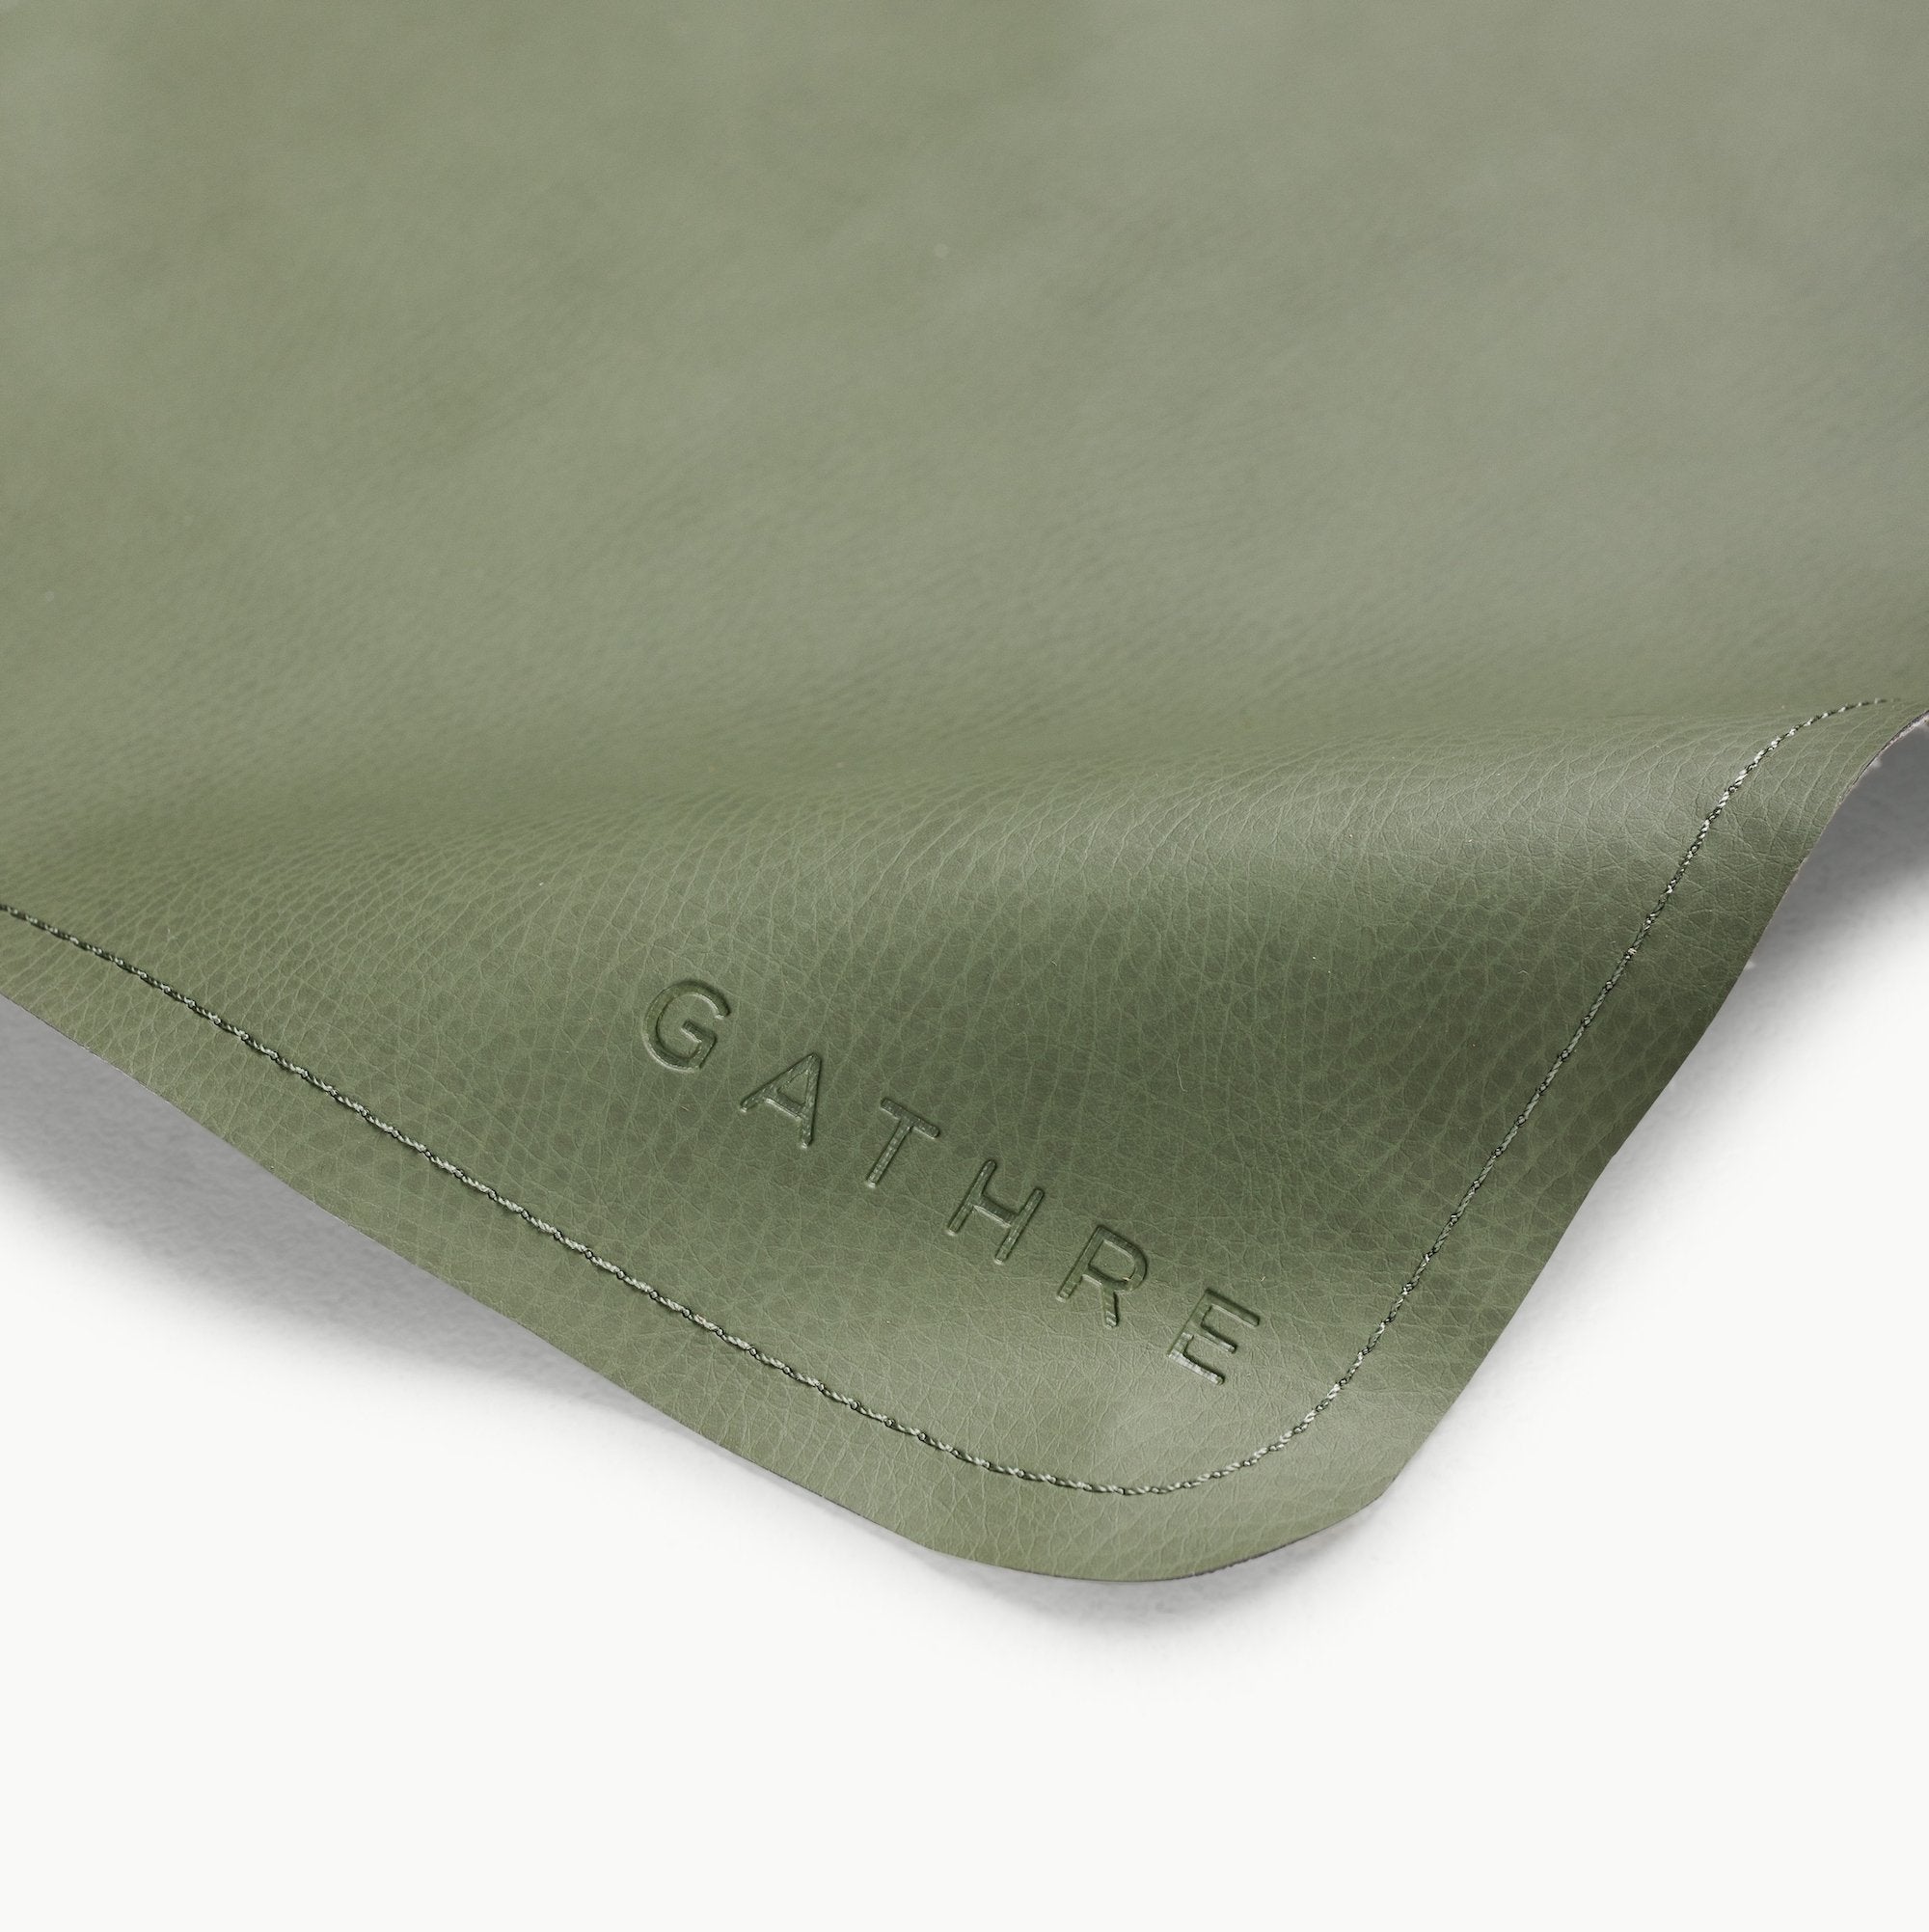 Thyme • Fog (on sale) / Square@Hanging tab on the Thyme/Fog Maxi Mat